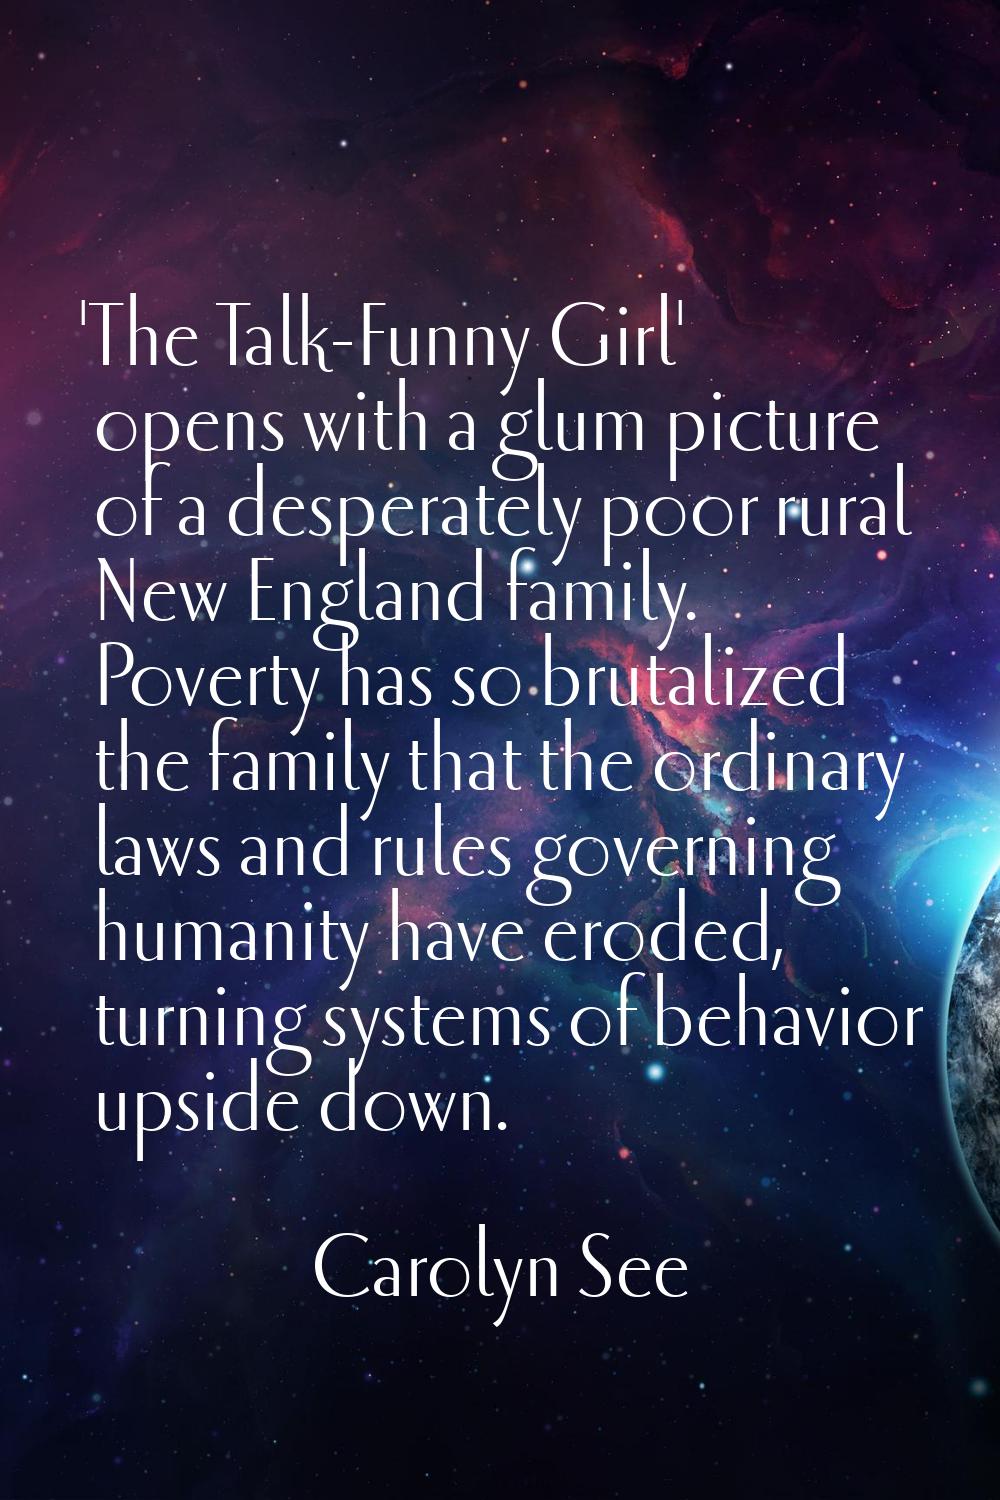 'The Talk-Funny Girl' opens with a glum picture of a desperately poor rural New England family. Pov